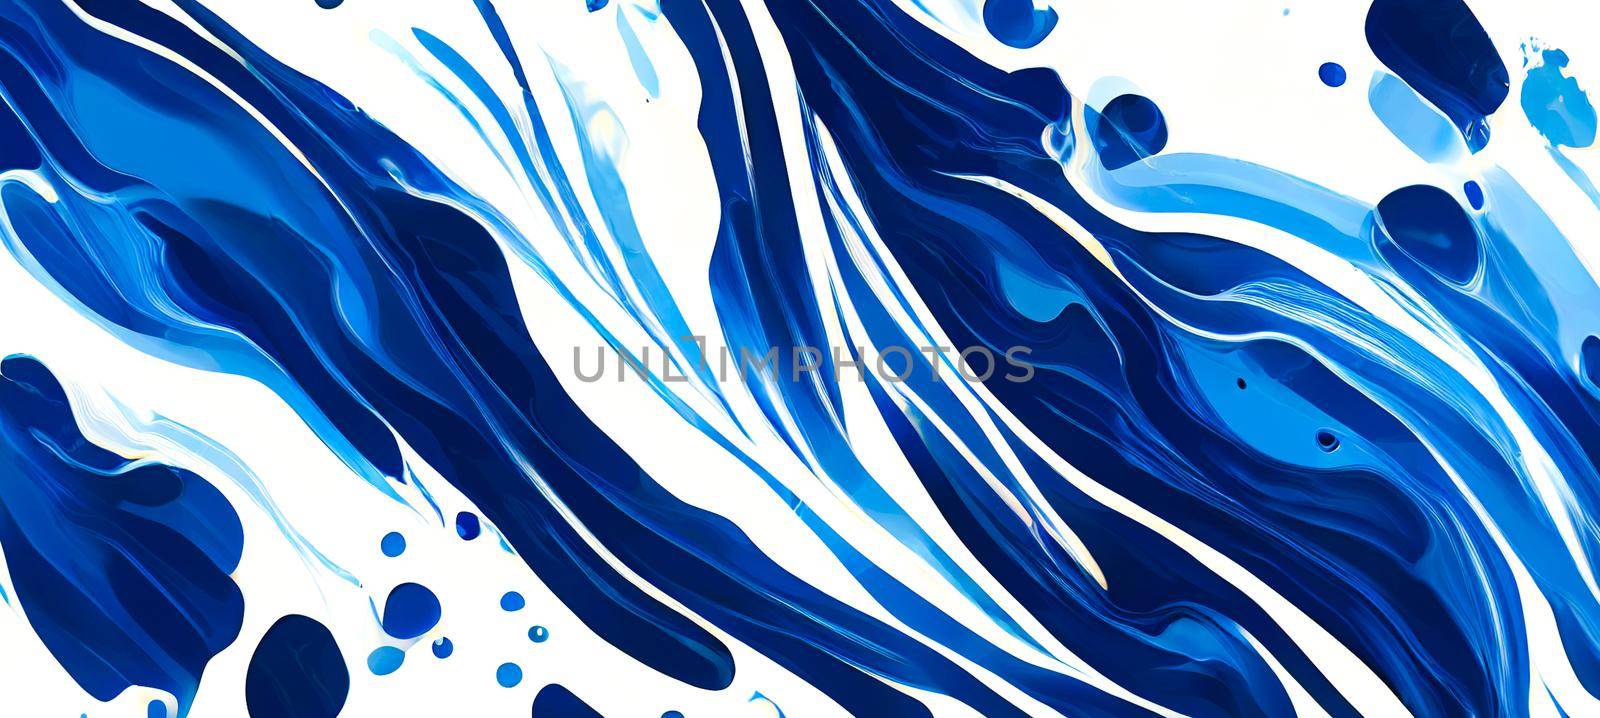 Liquid marble watercolor abstract texture in blue and white wallpaper.